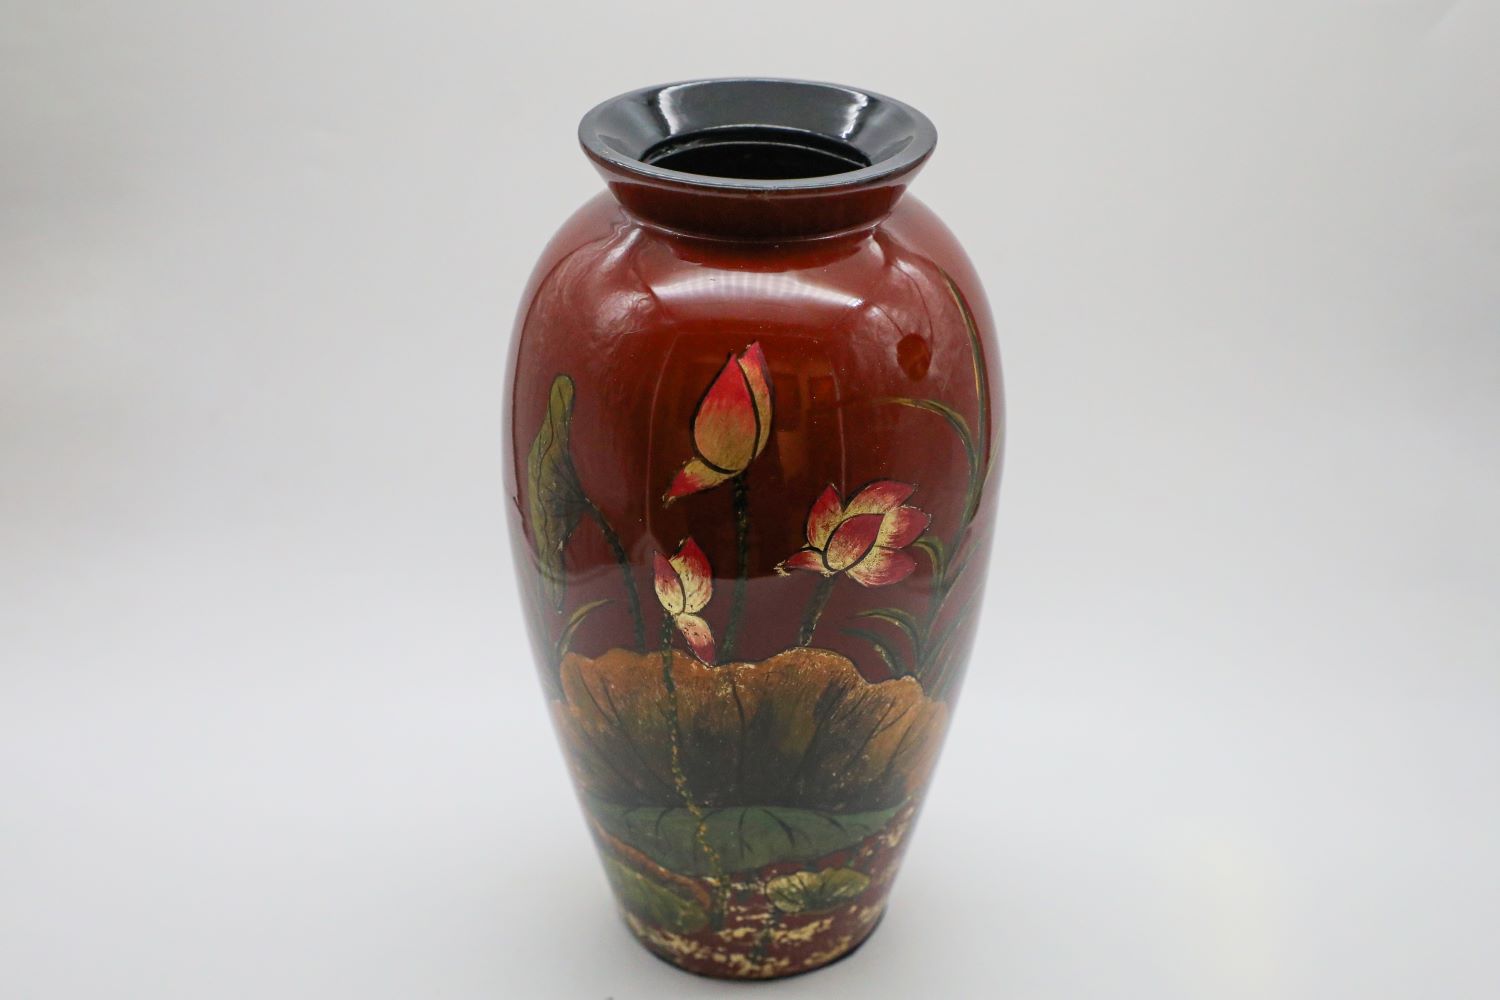 Vase of Early Dew 03 - Vietnamese Ceramic Vase by Artist Dinh Thi Thanh